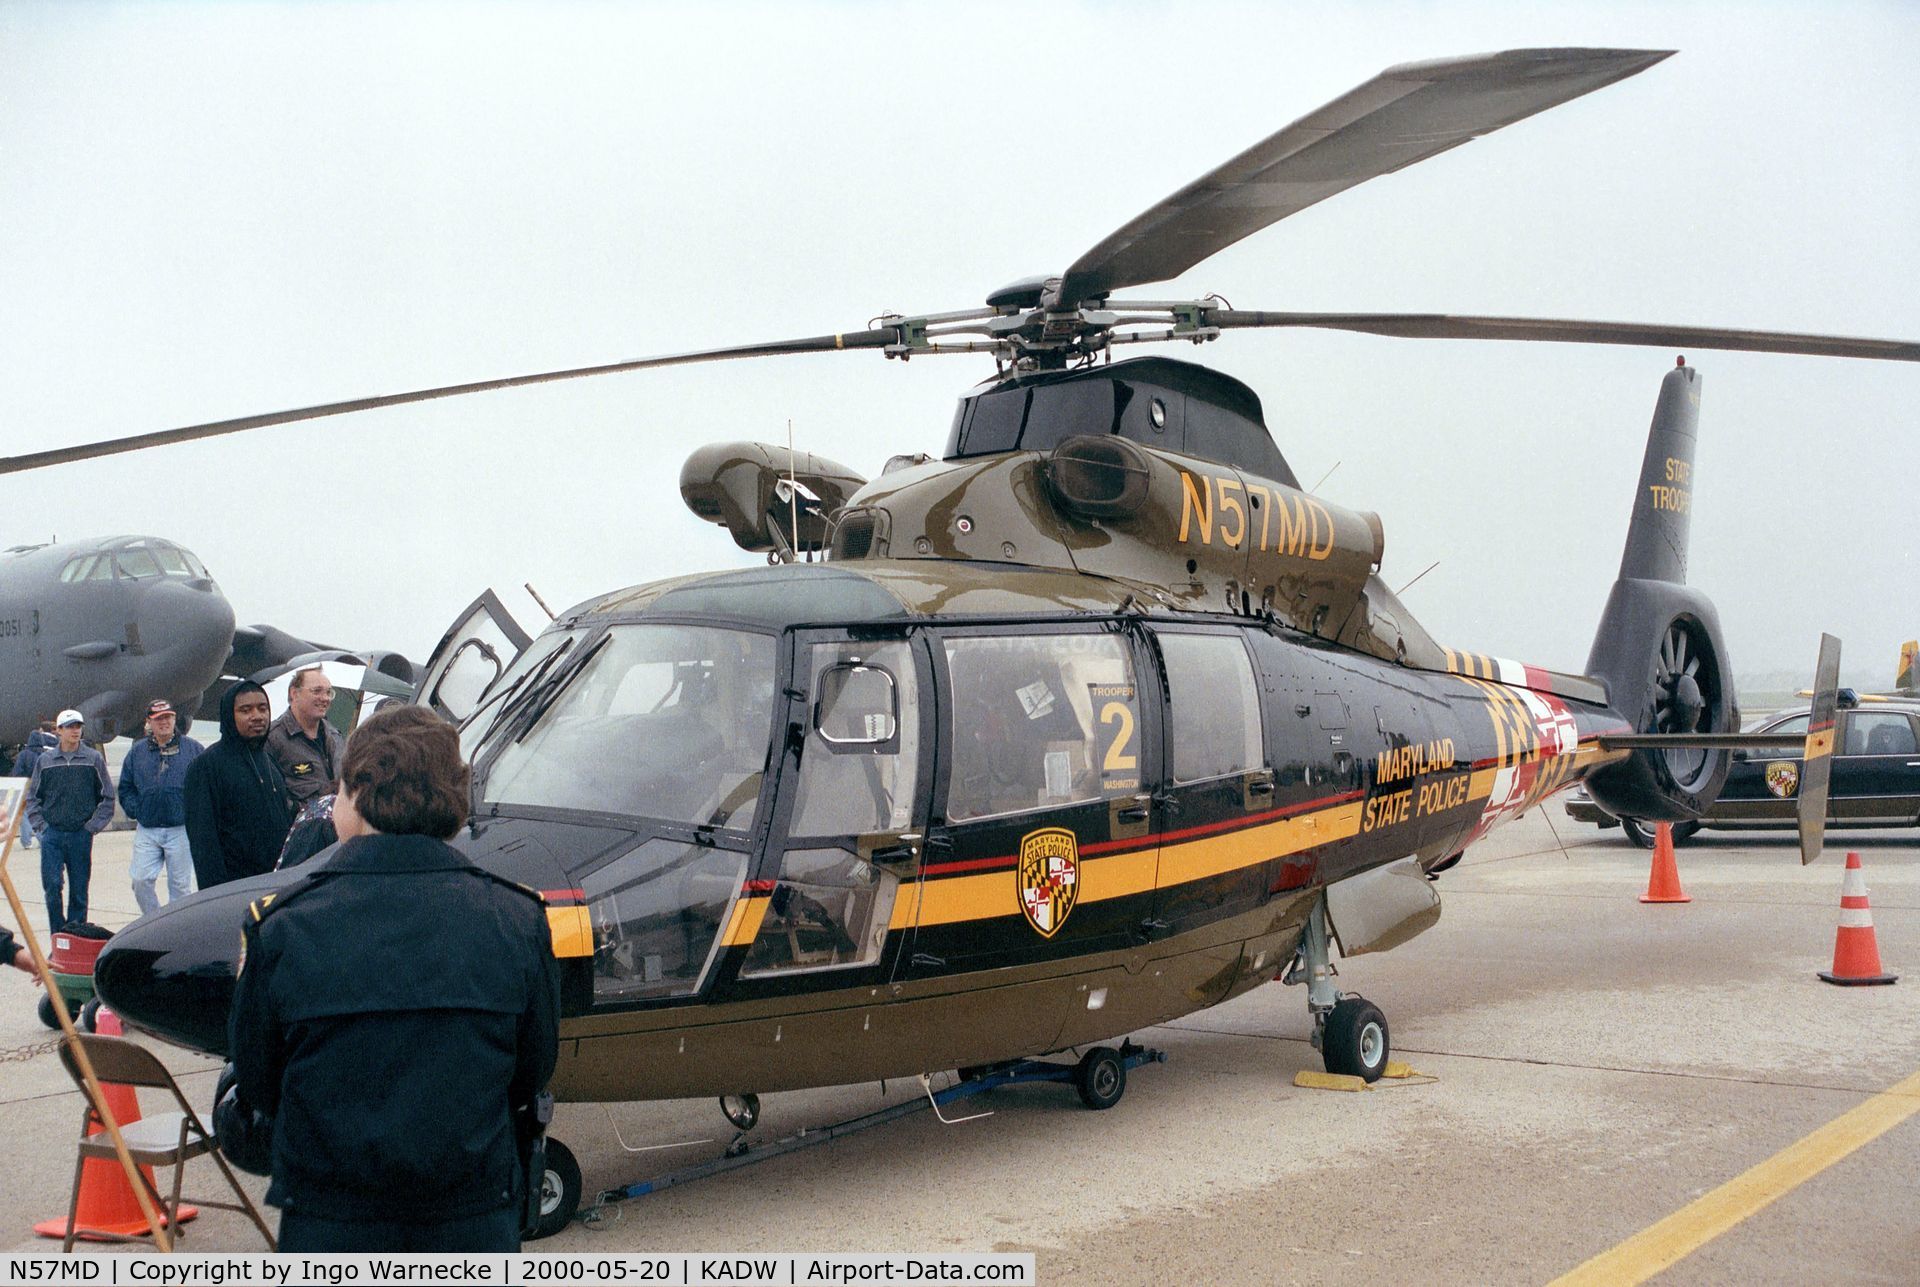 N57MD, 1988 Aerospatiale SA-365N-1 Dauphin 2 C/N 6252, Aerospatiale SA.365N1 Dauphin II of the Maryland State Police at Andrews AFB during Armed Forces Day 2000